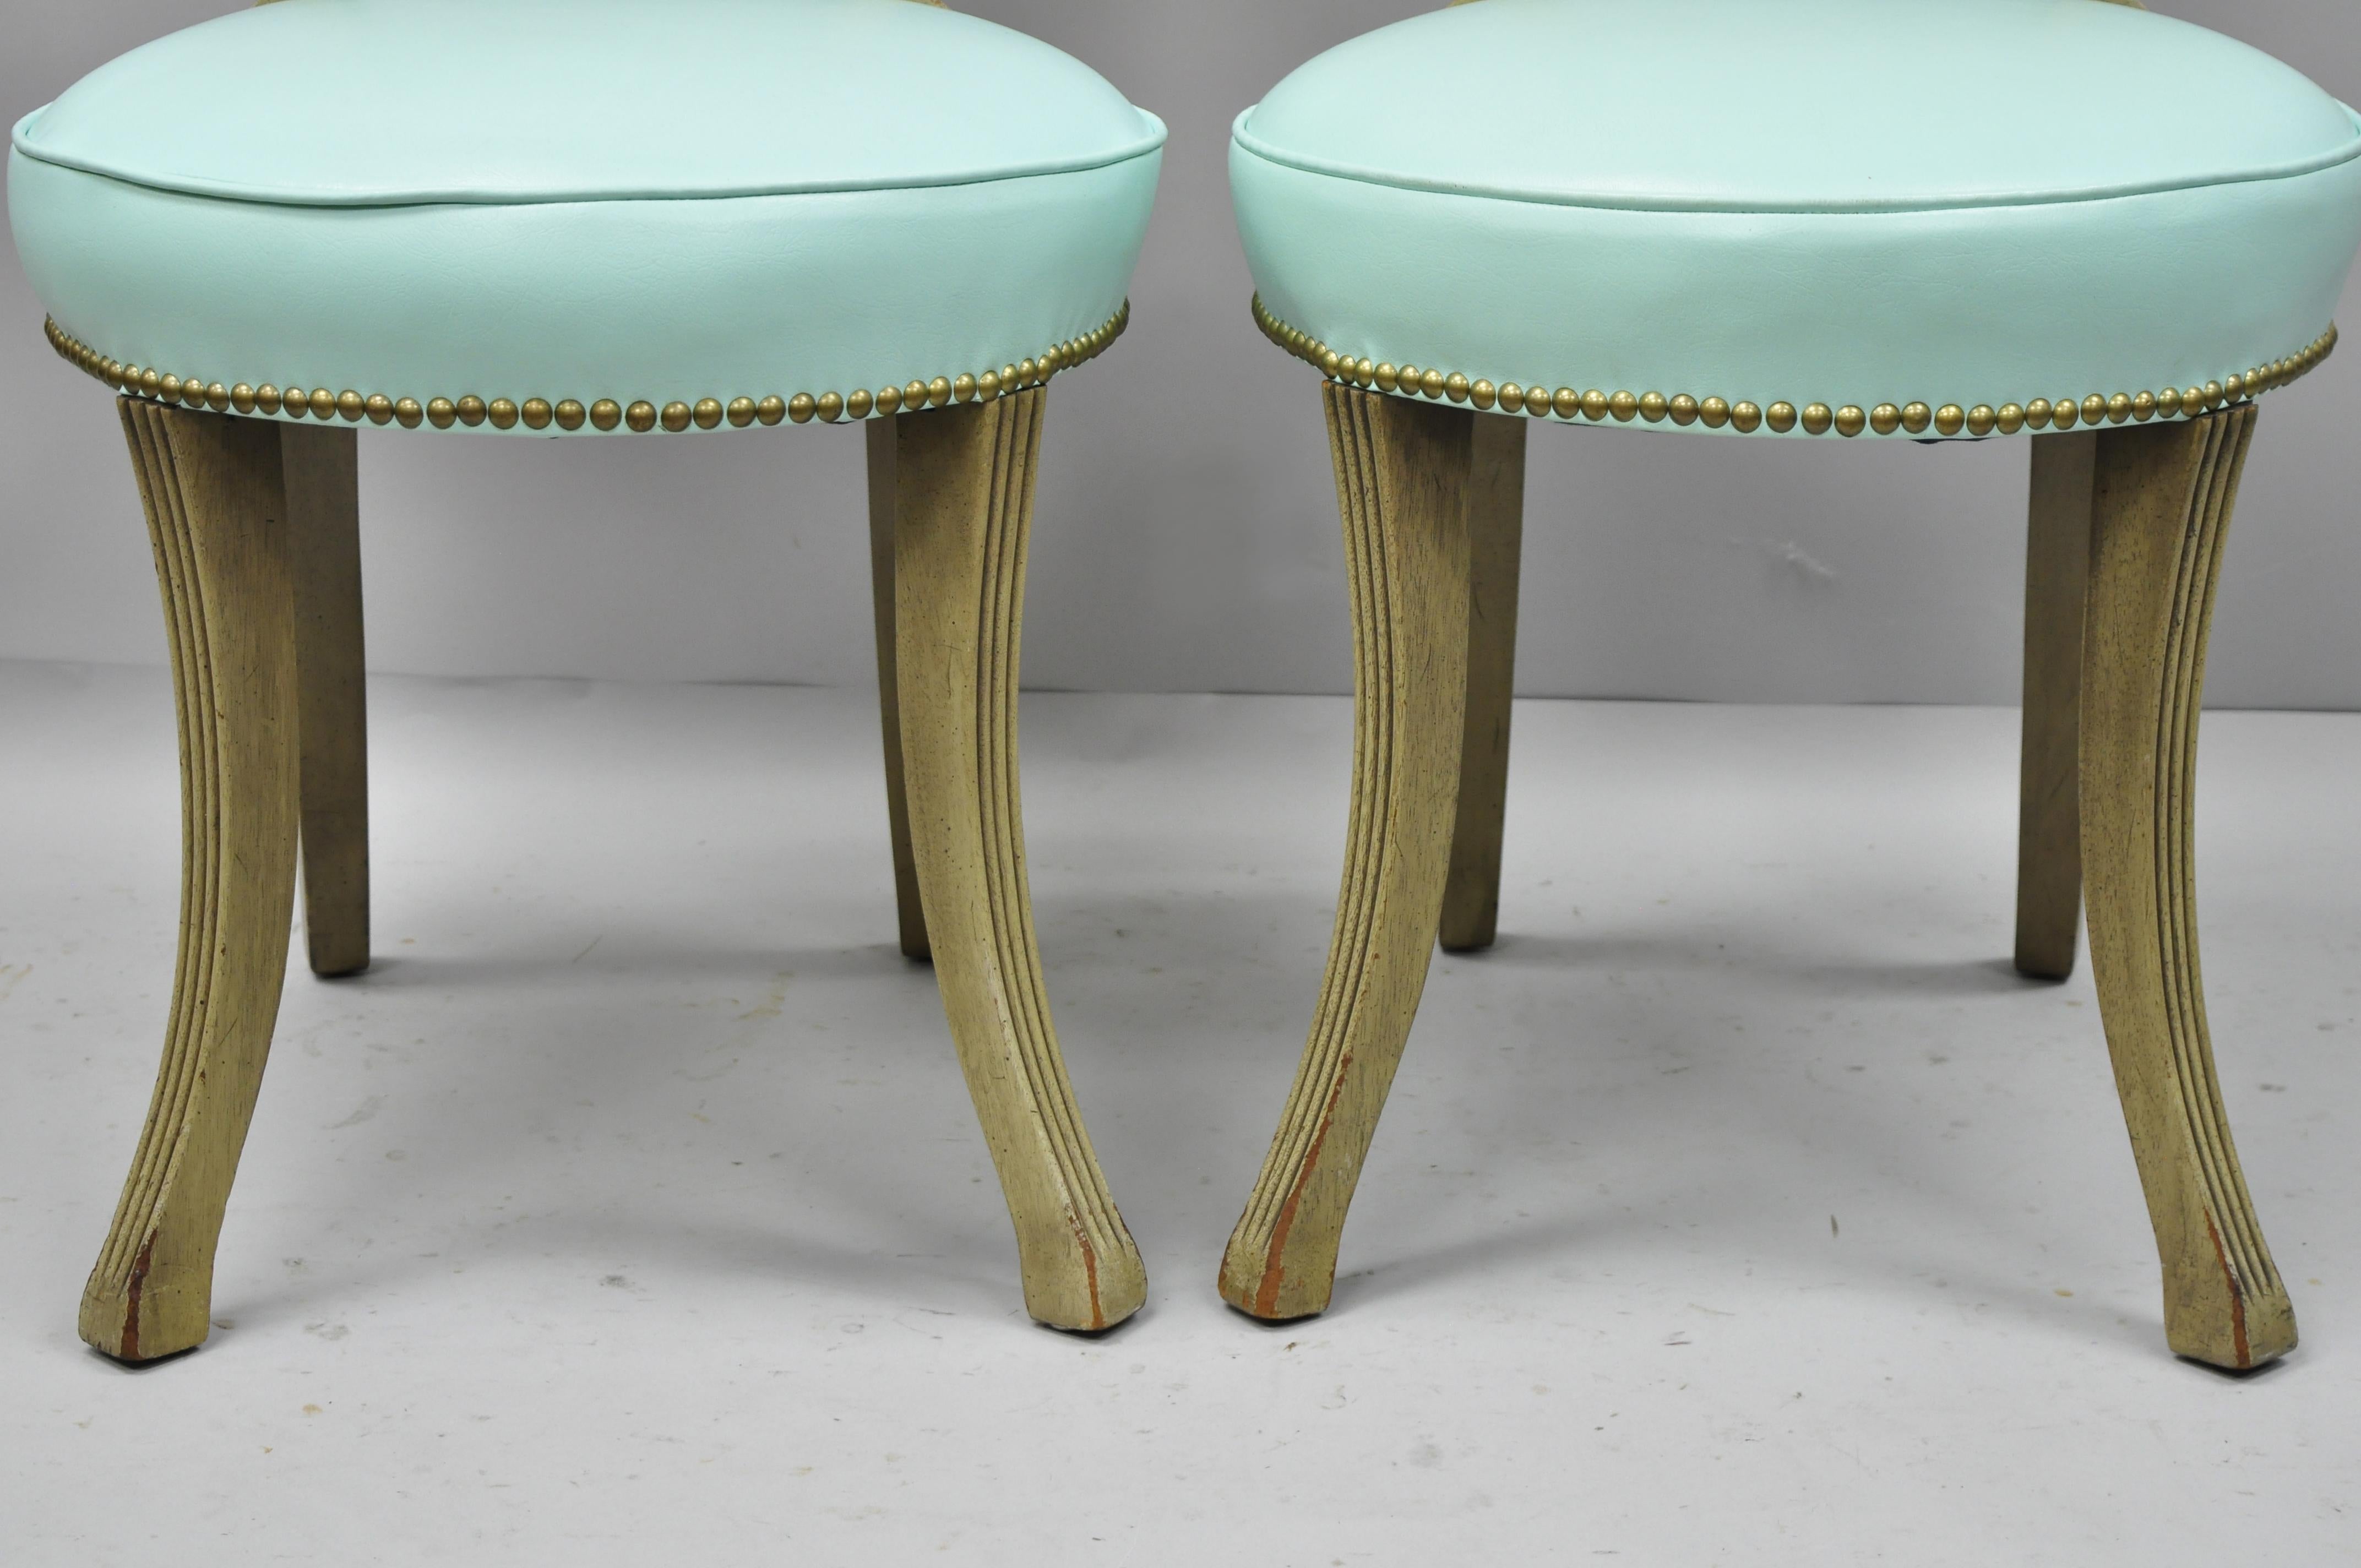 Carved Mahogany French Regency Style Chairs with Brass Handle & Aqua Vinyl, Pair In Good Condition For Sale In Philadelphia, PA